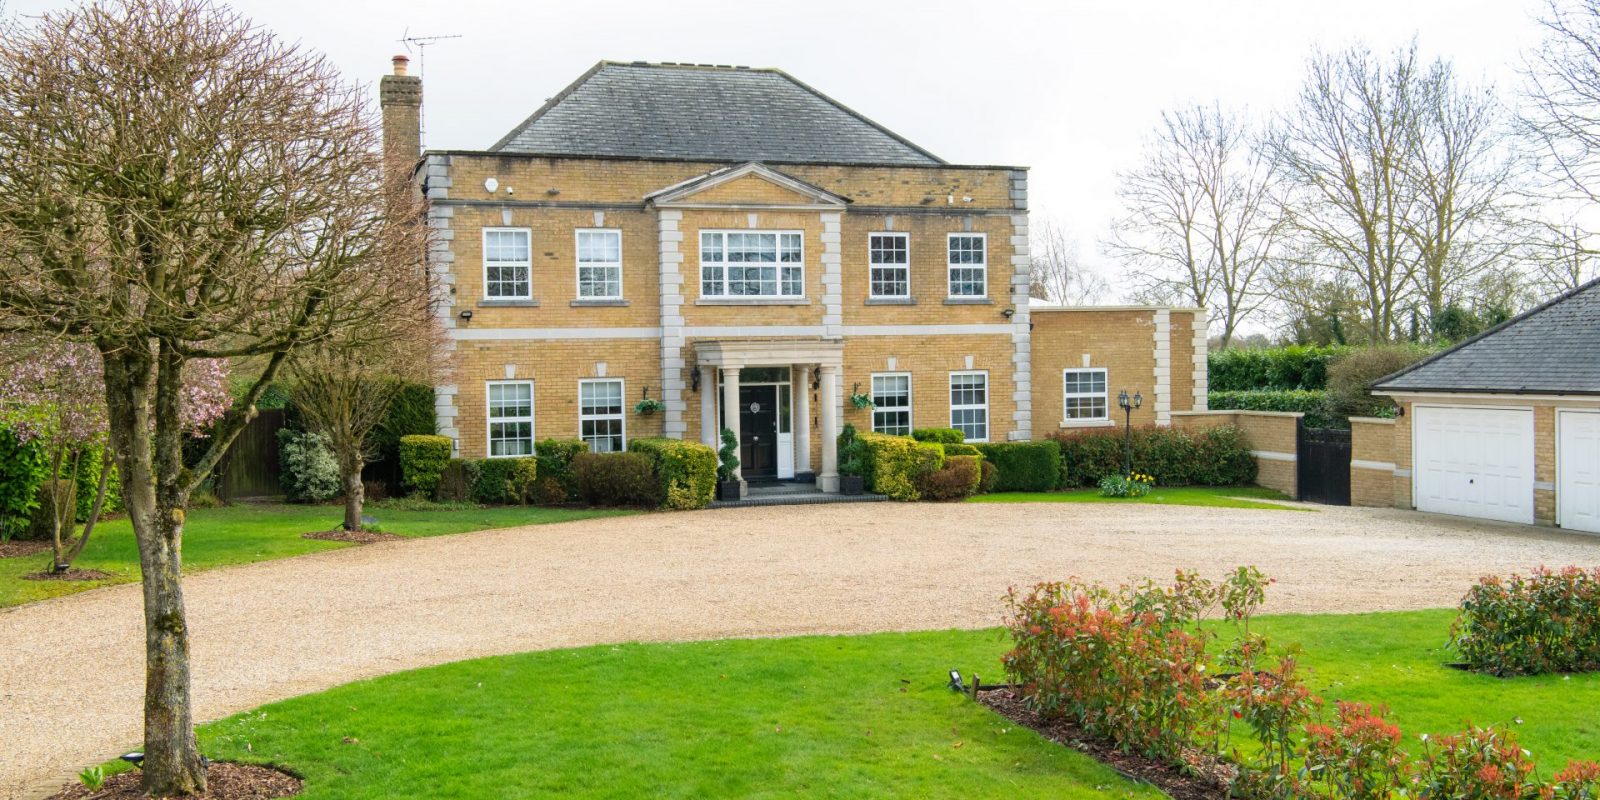 Welford House, Blackmore